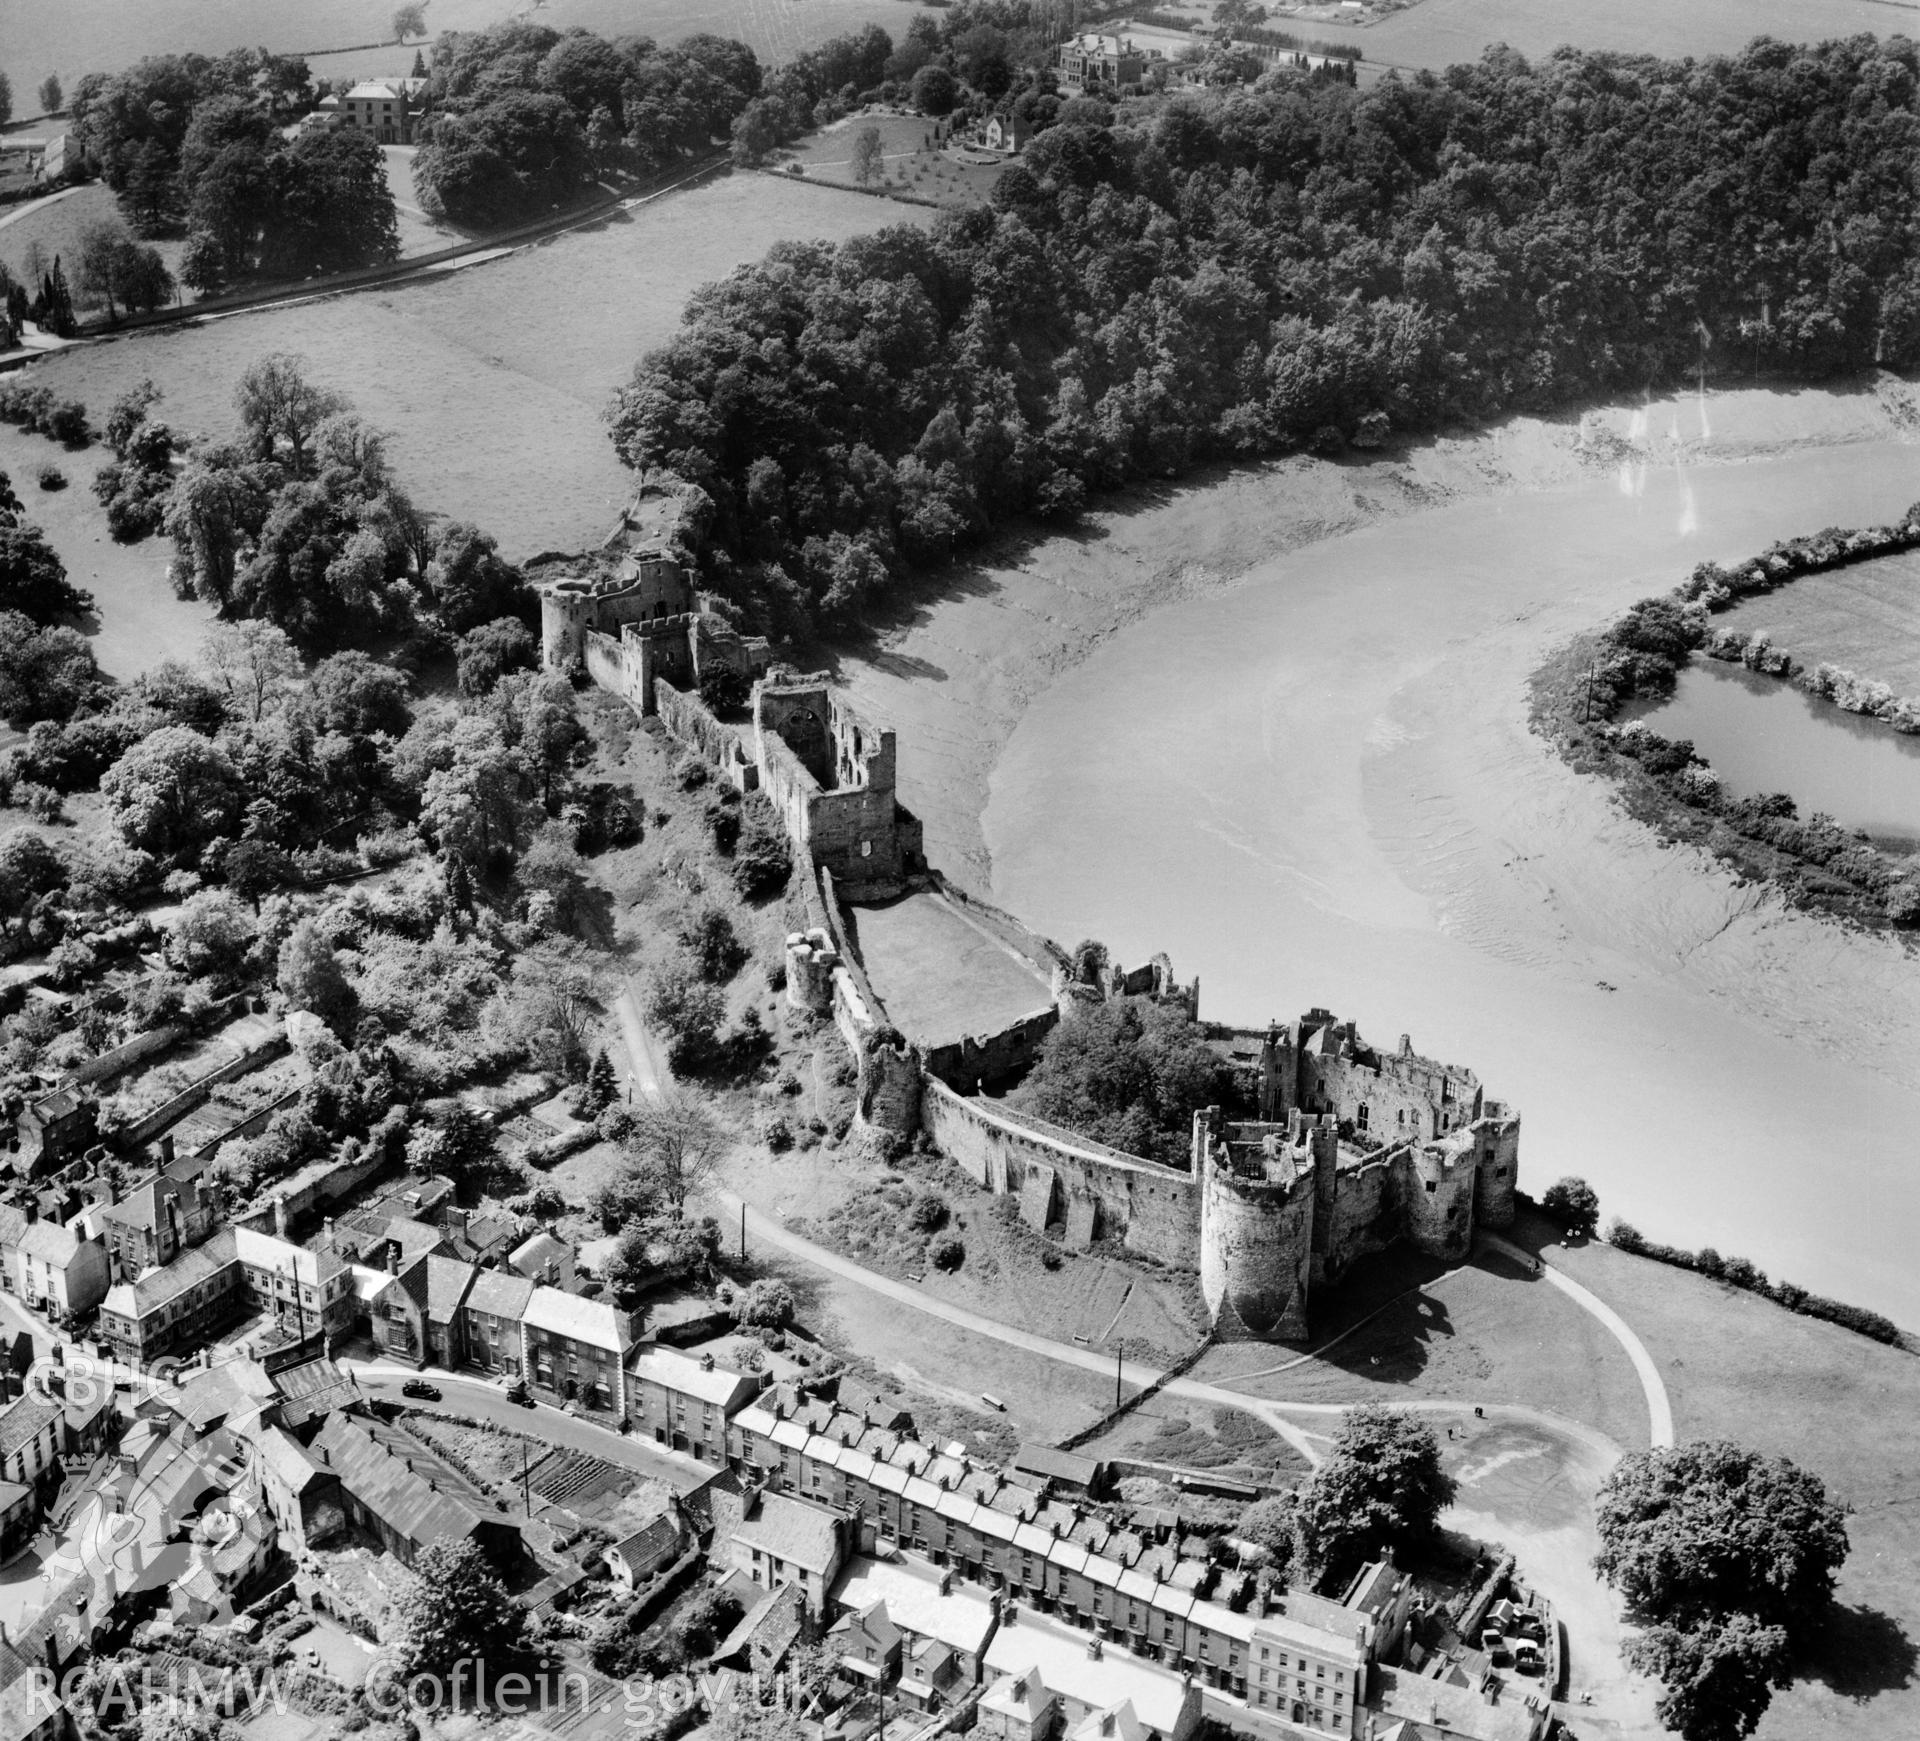 View of Chepstow showing castle